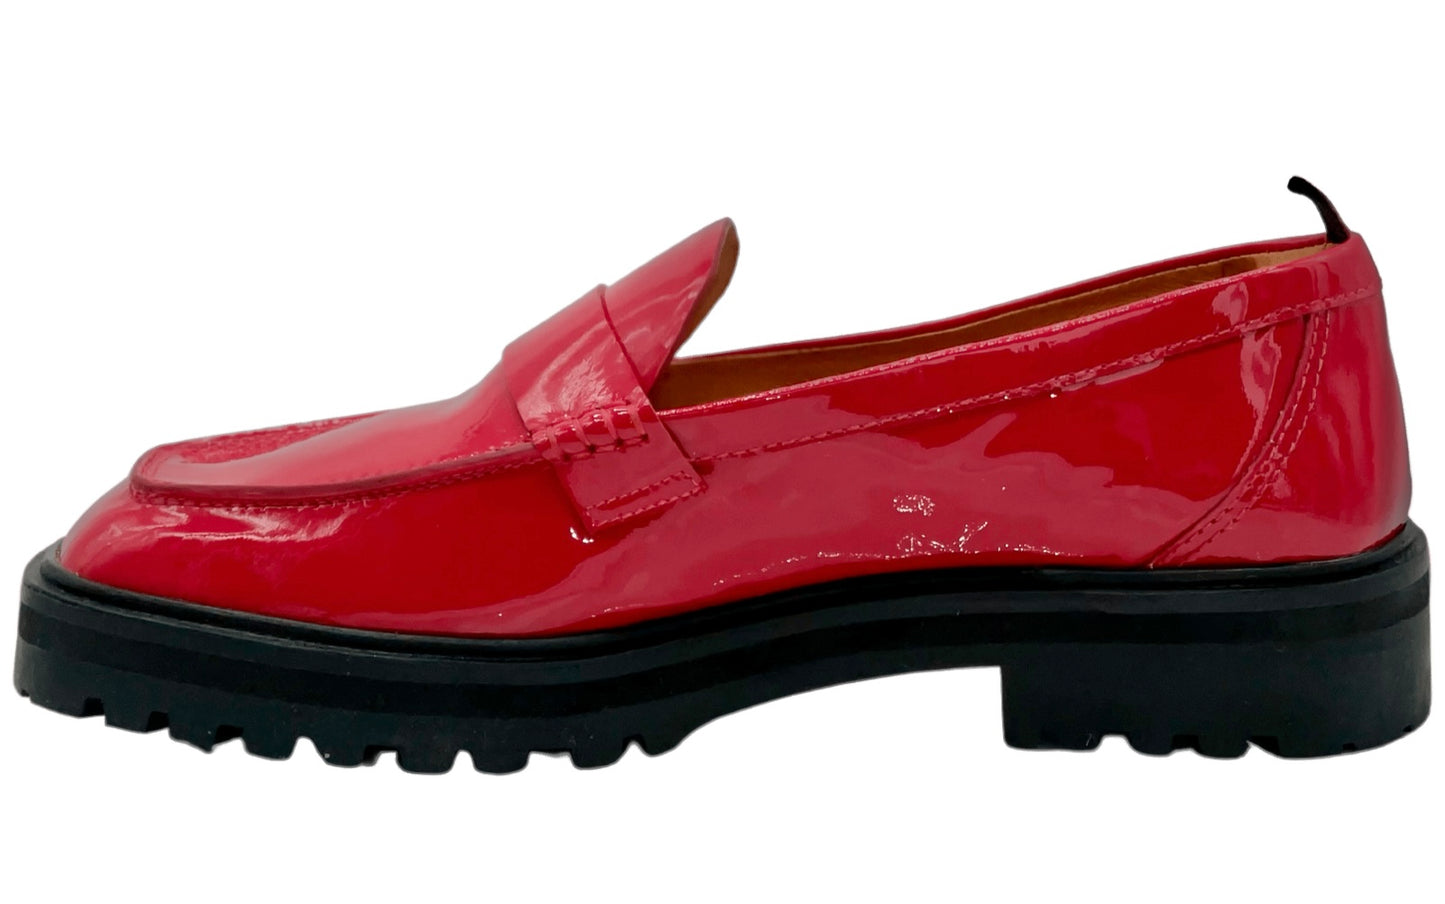 dr LIZA loafer - RUBY RED PATENT